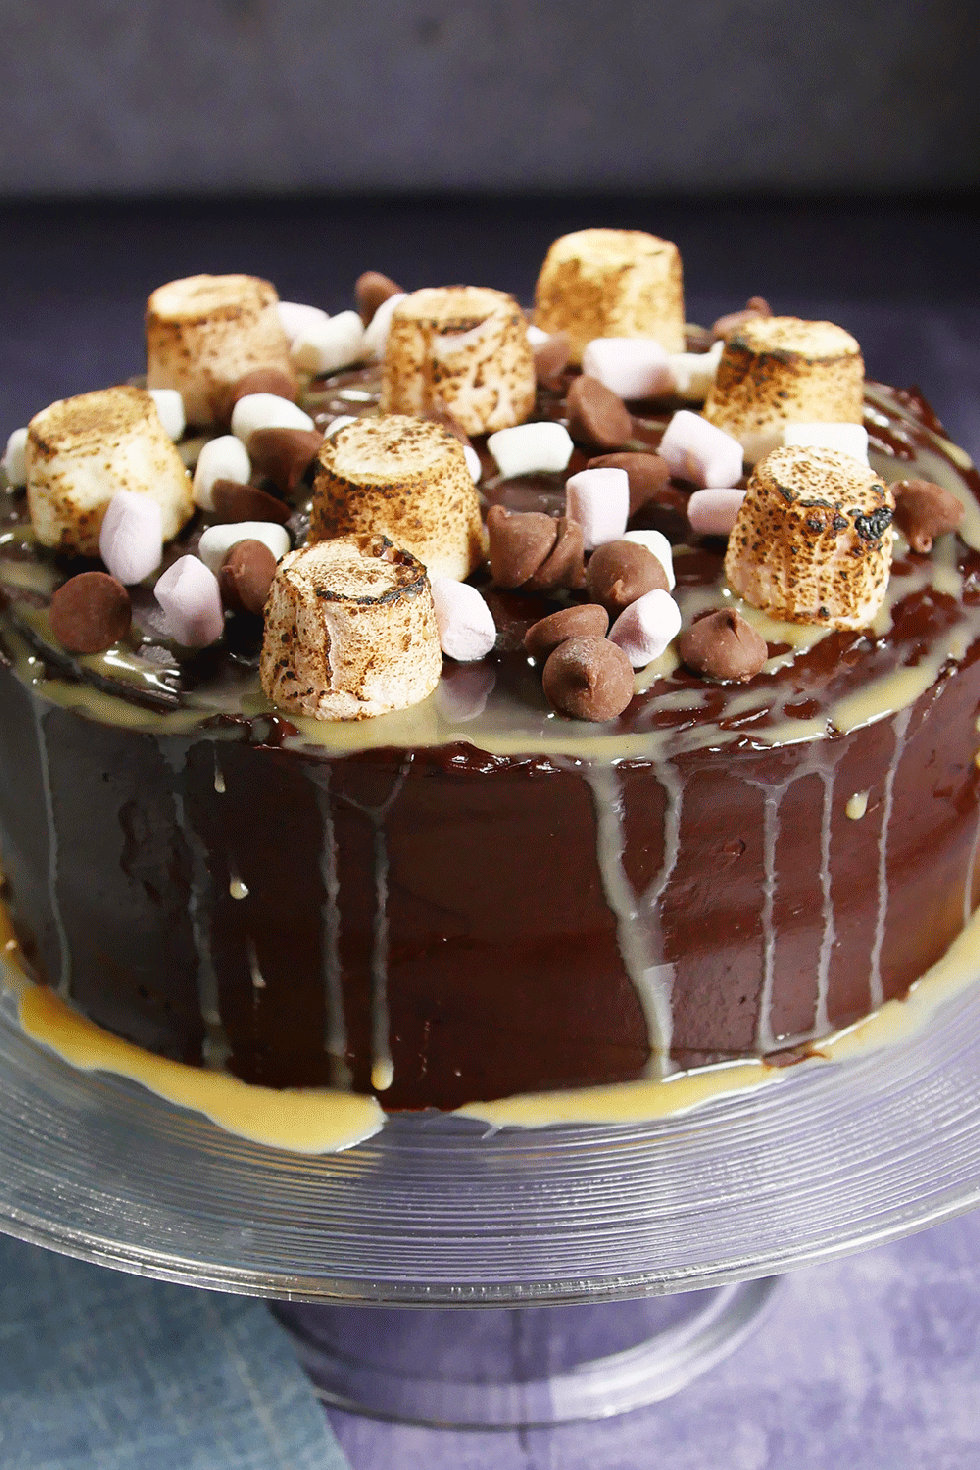 Chocolate Fudge Cake with Caramel Frosting - Tasting Thyme